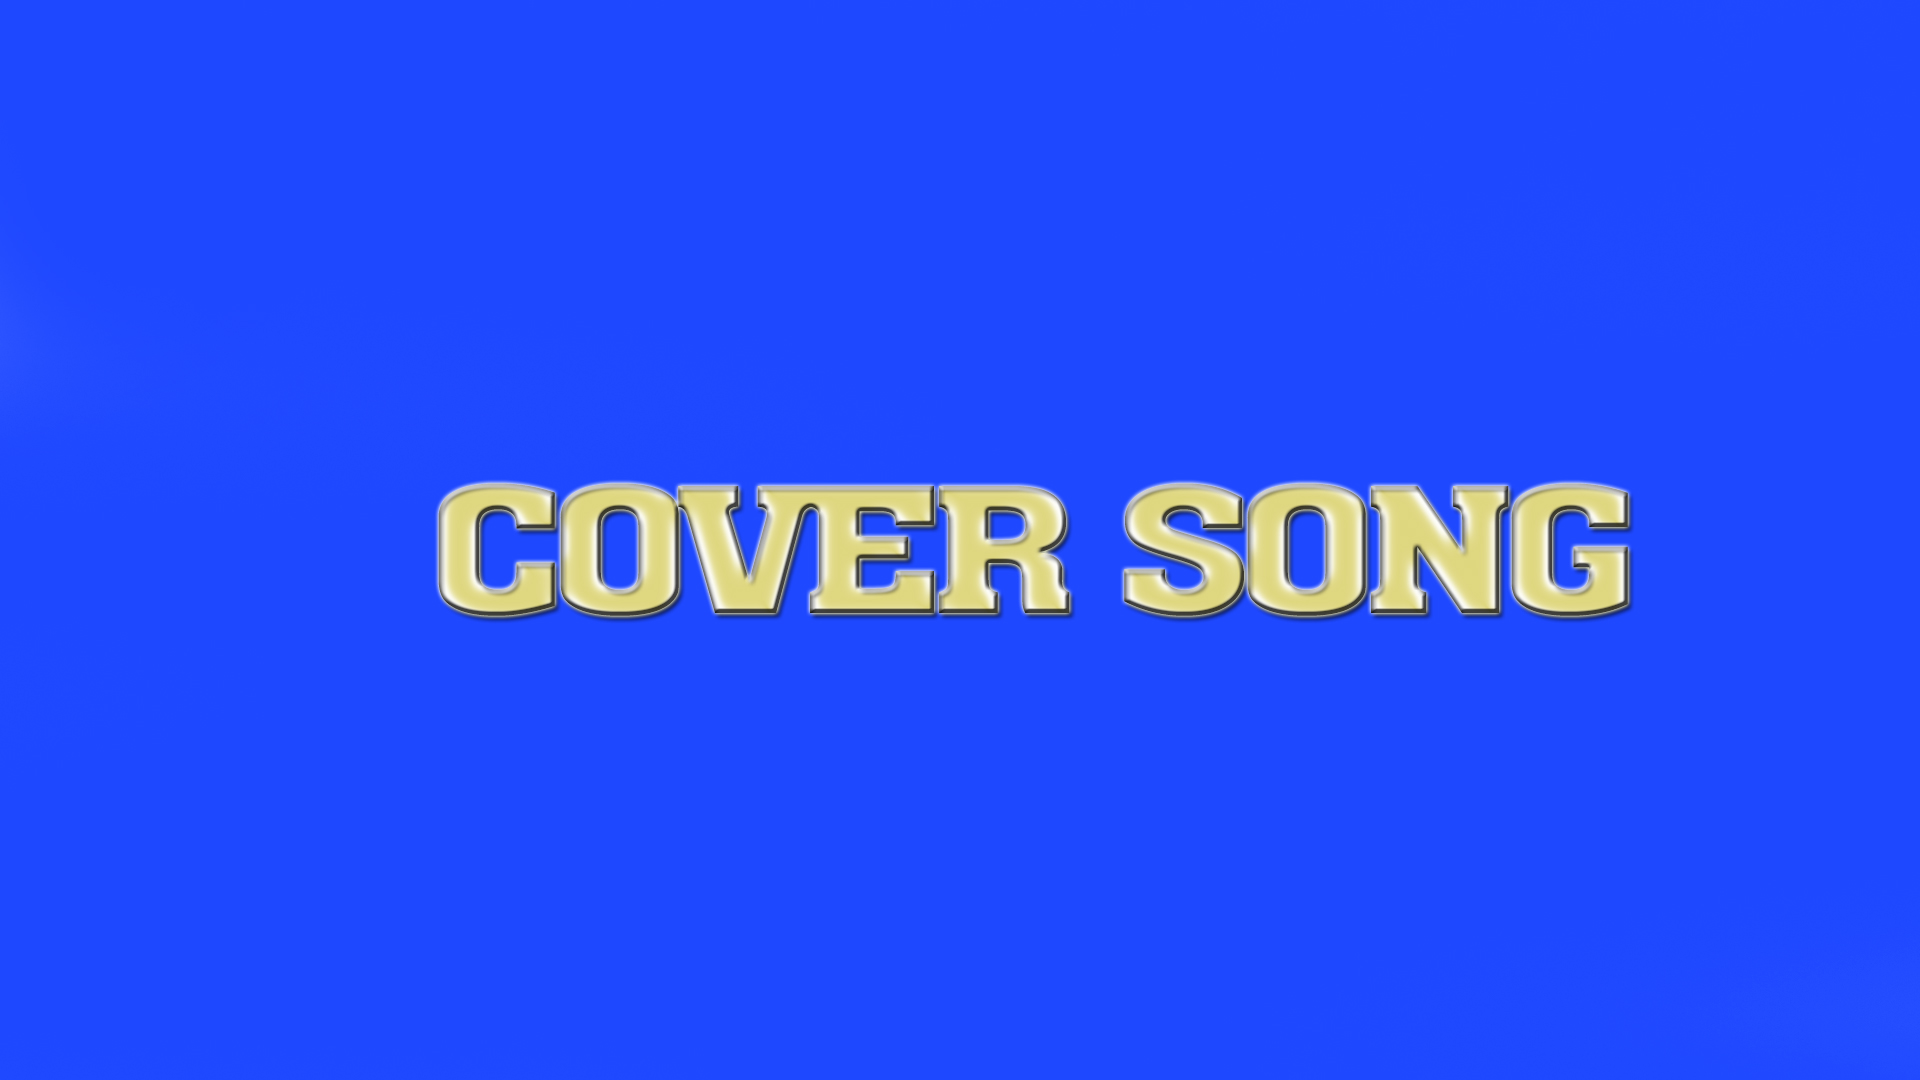 COVER SONG